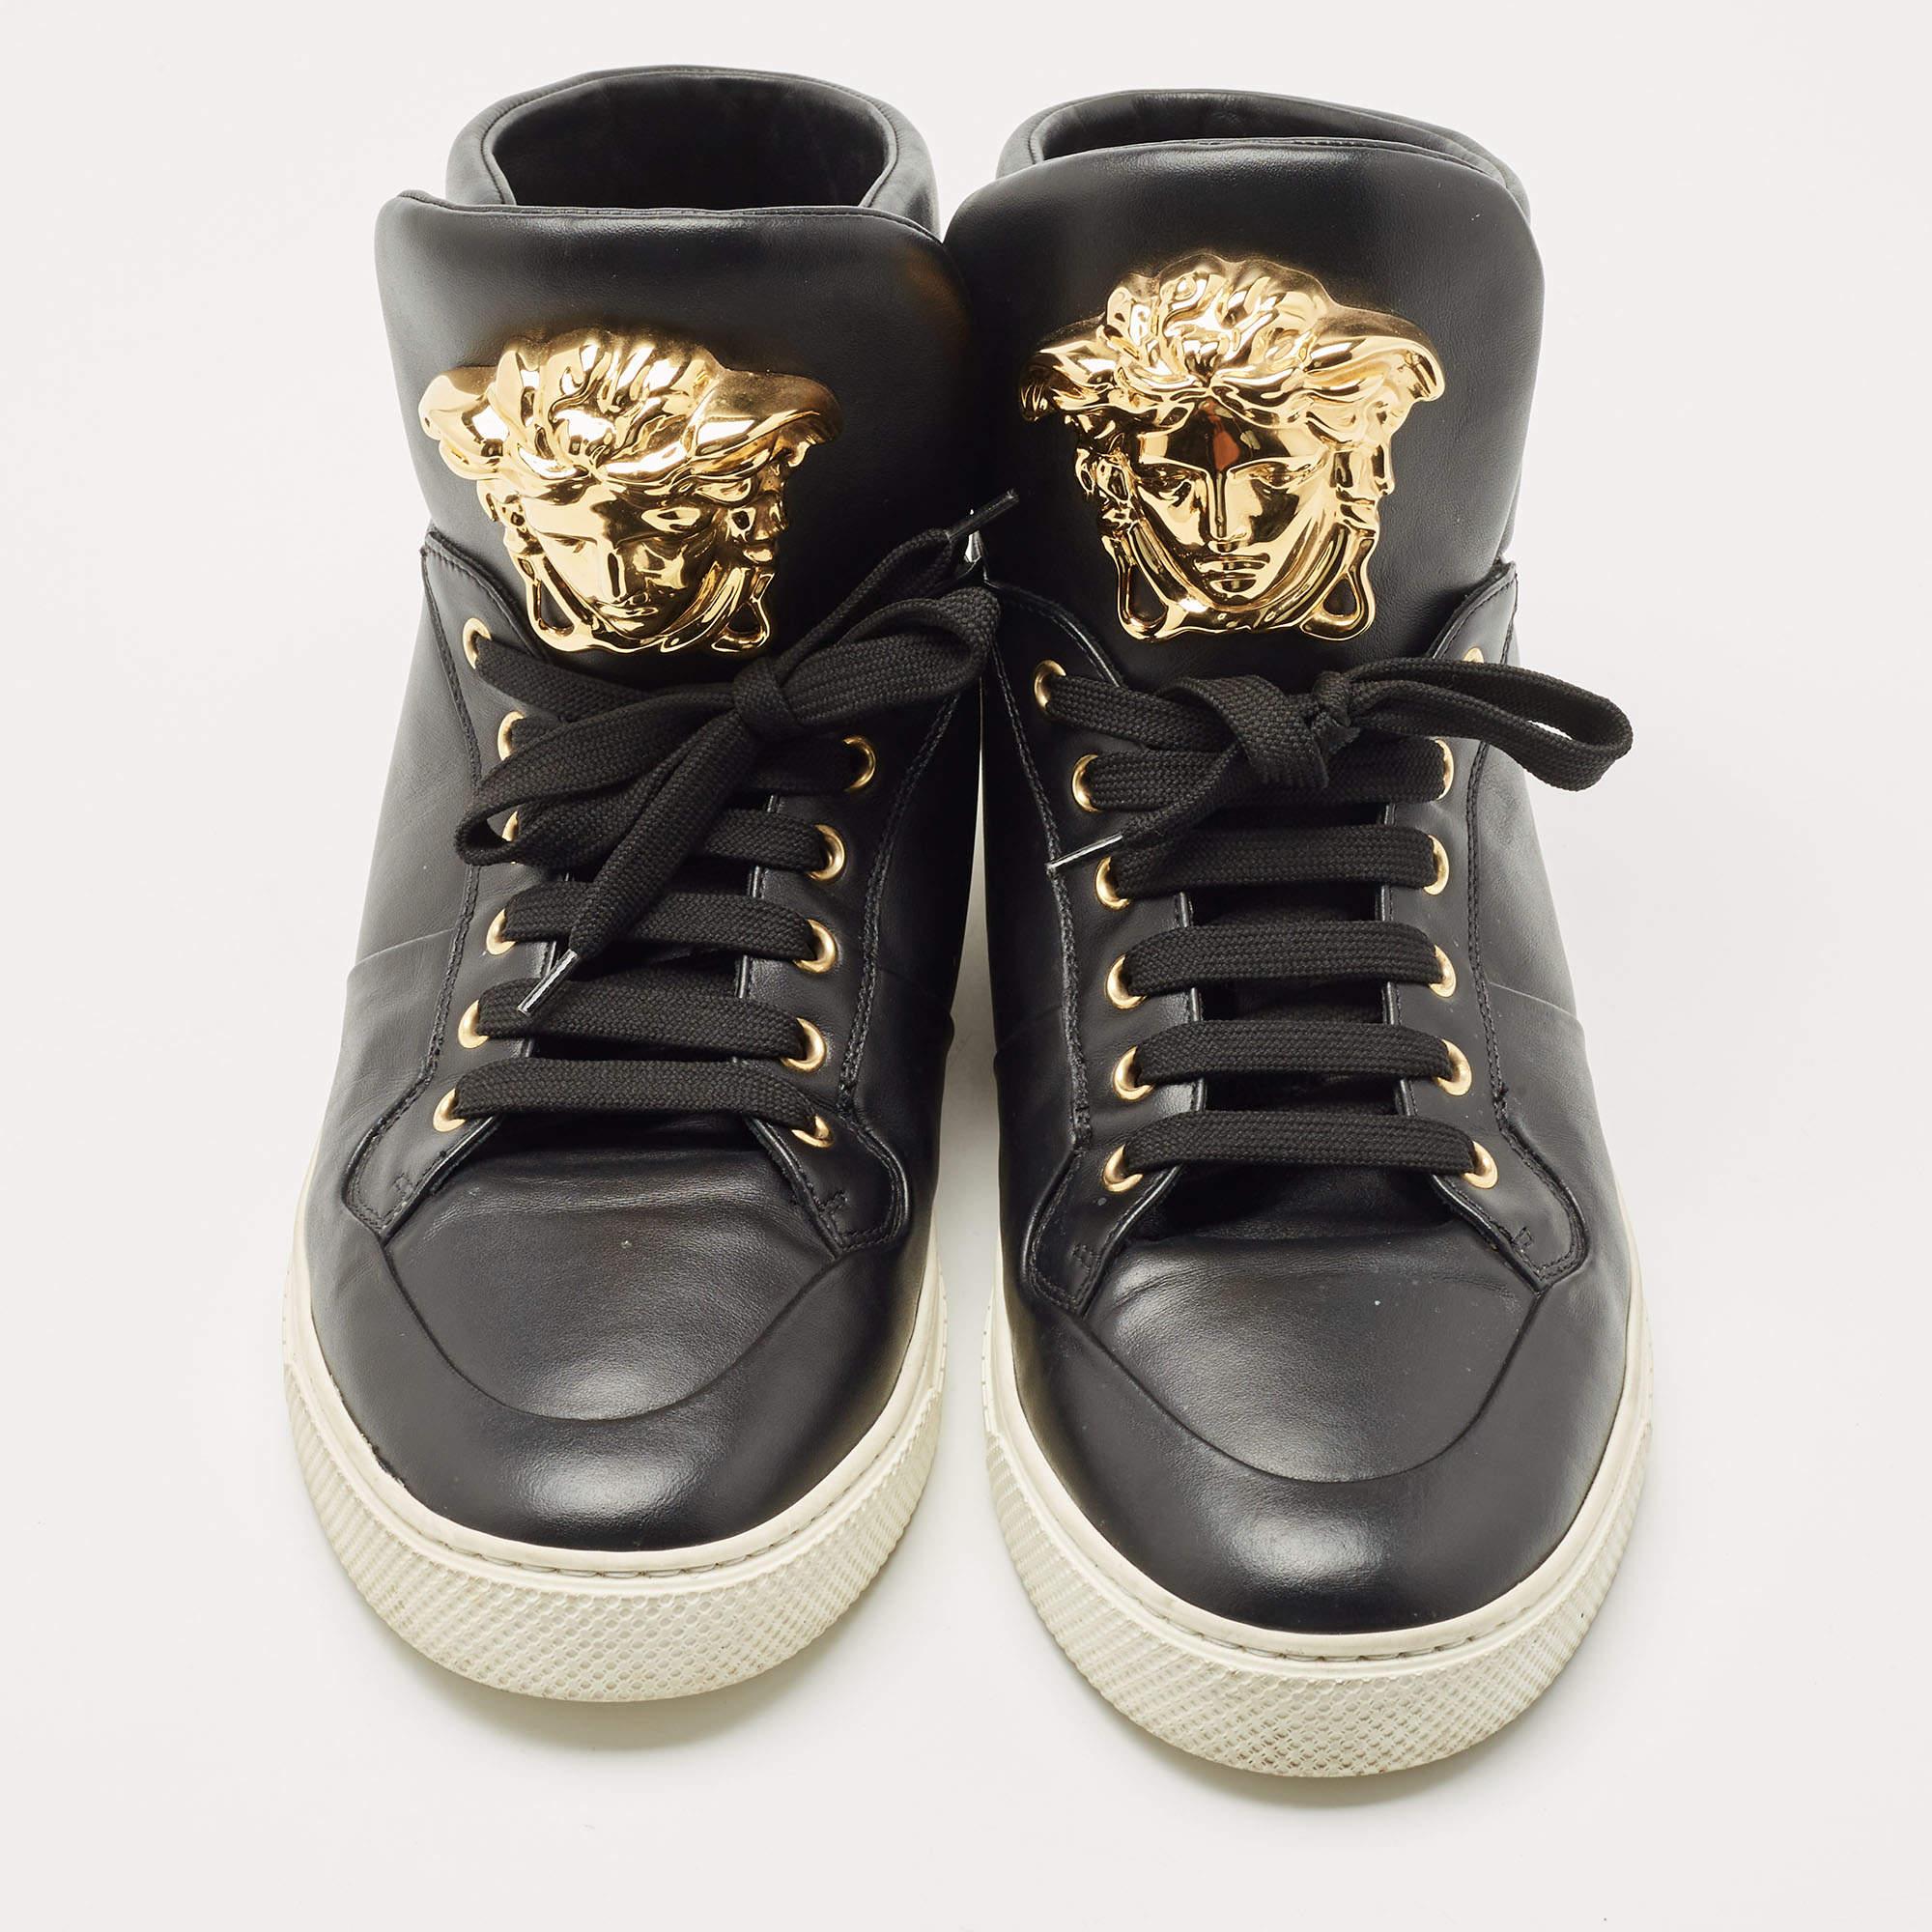 Sneakers are sought-after for reasons like comfort, ease and casual style. These Versace high tops fit right in as they are stylish and snug. Brimming with fabulous details, these Versace sneakers are crafted from leather into a high-top silhouette